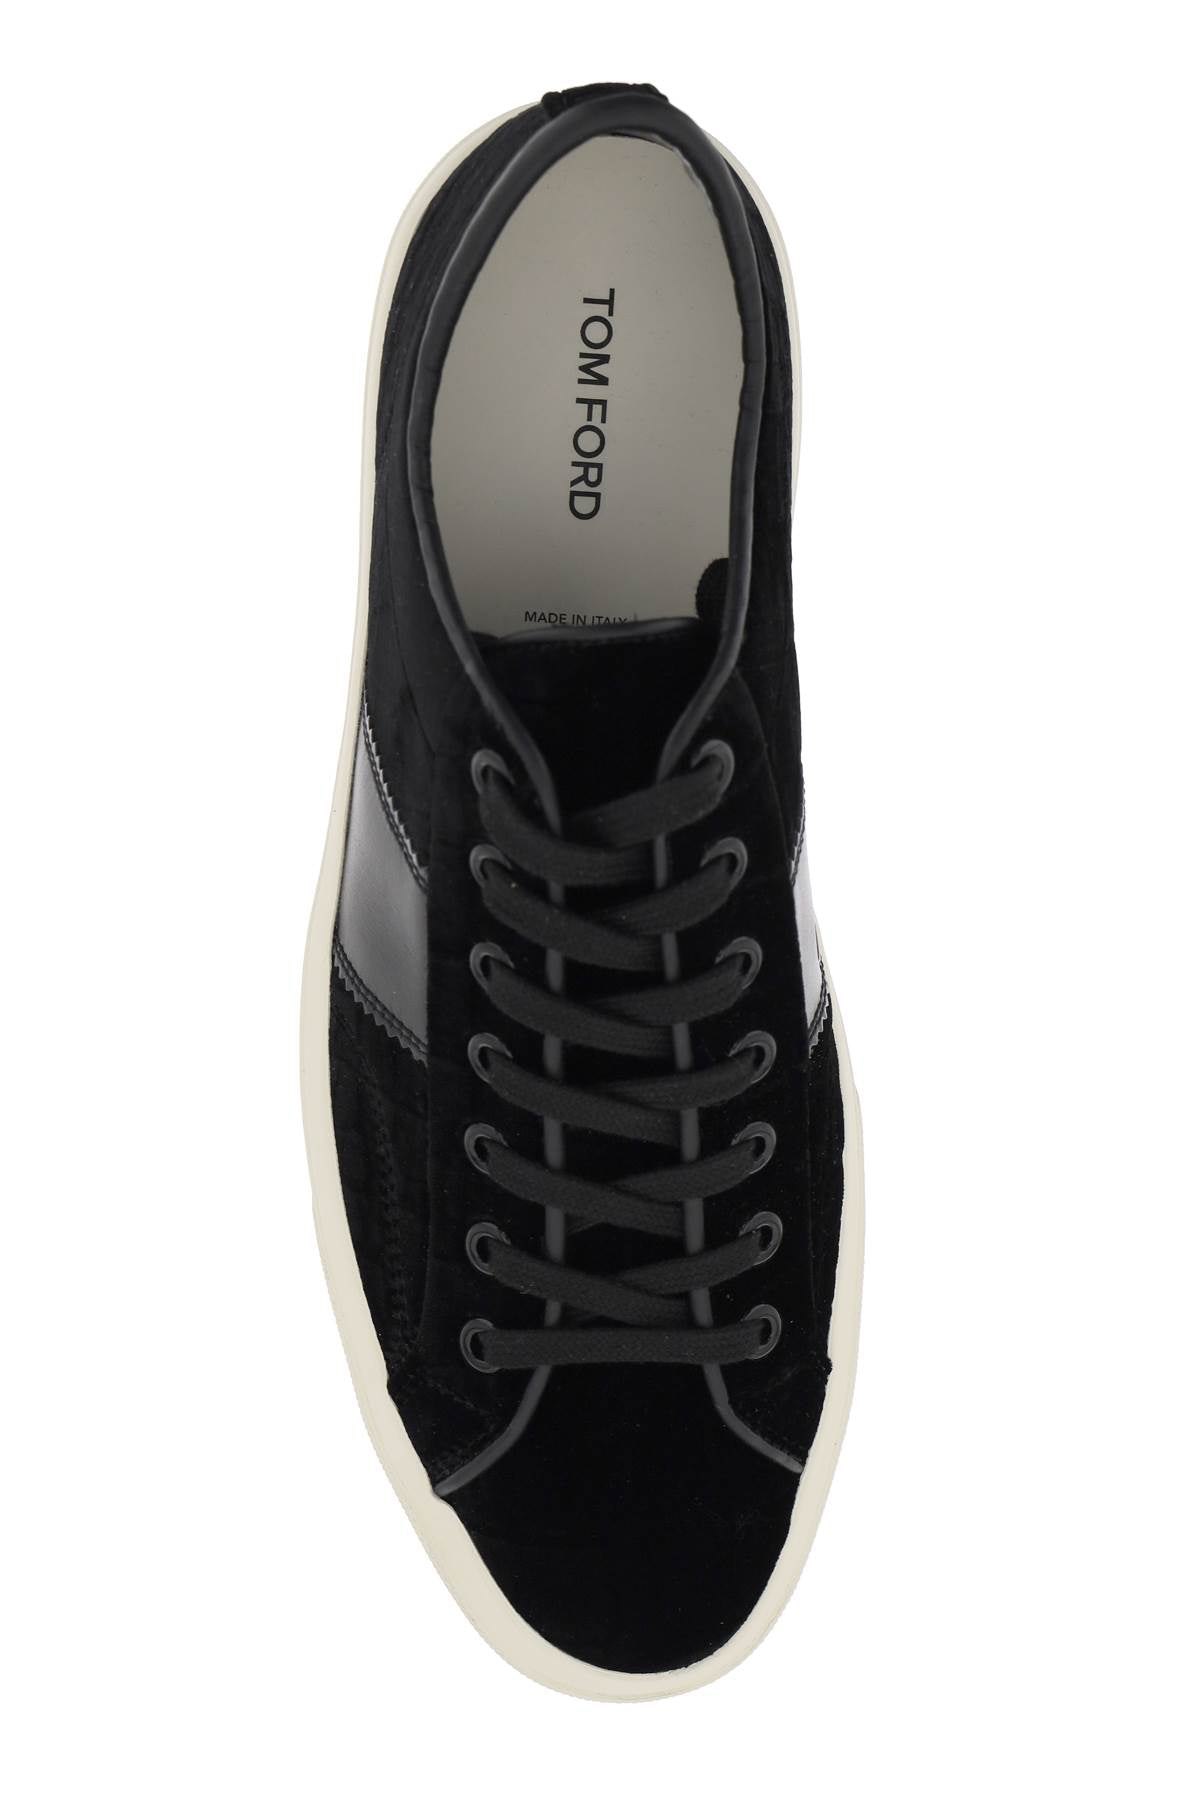 Tom ford cambridge sneakers-1